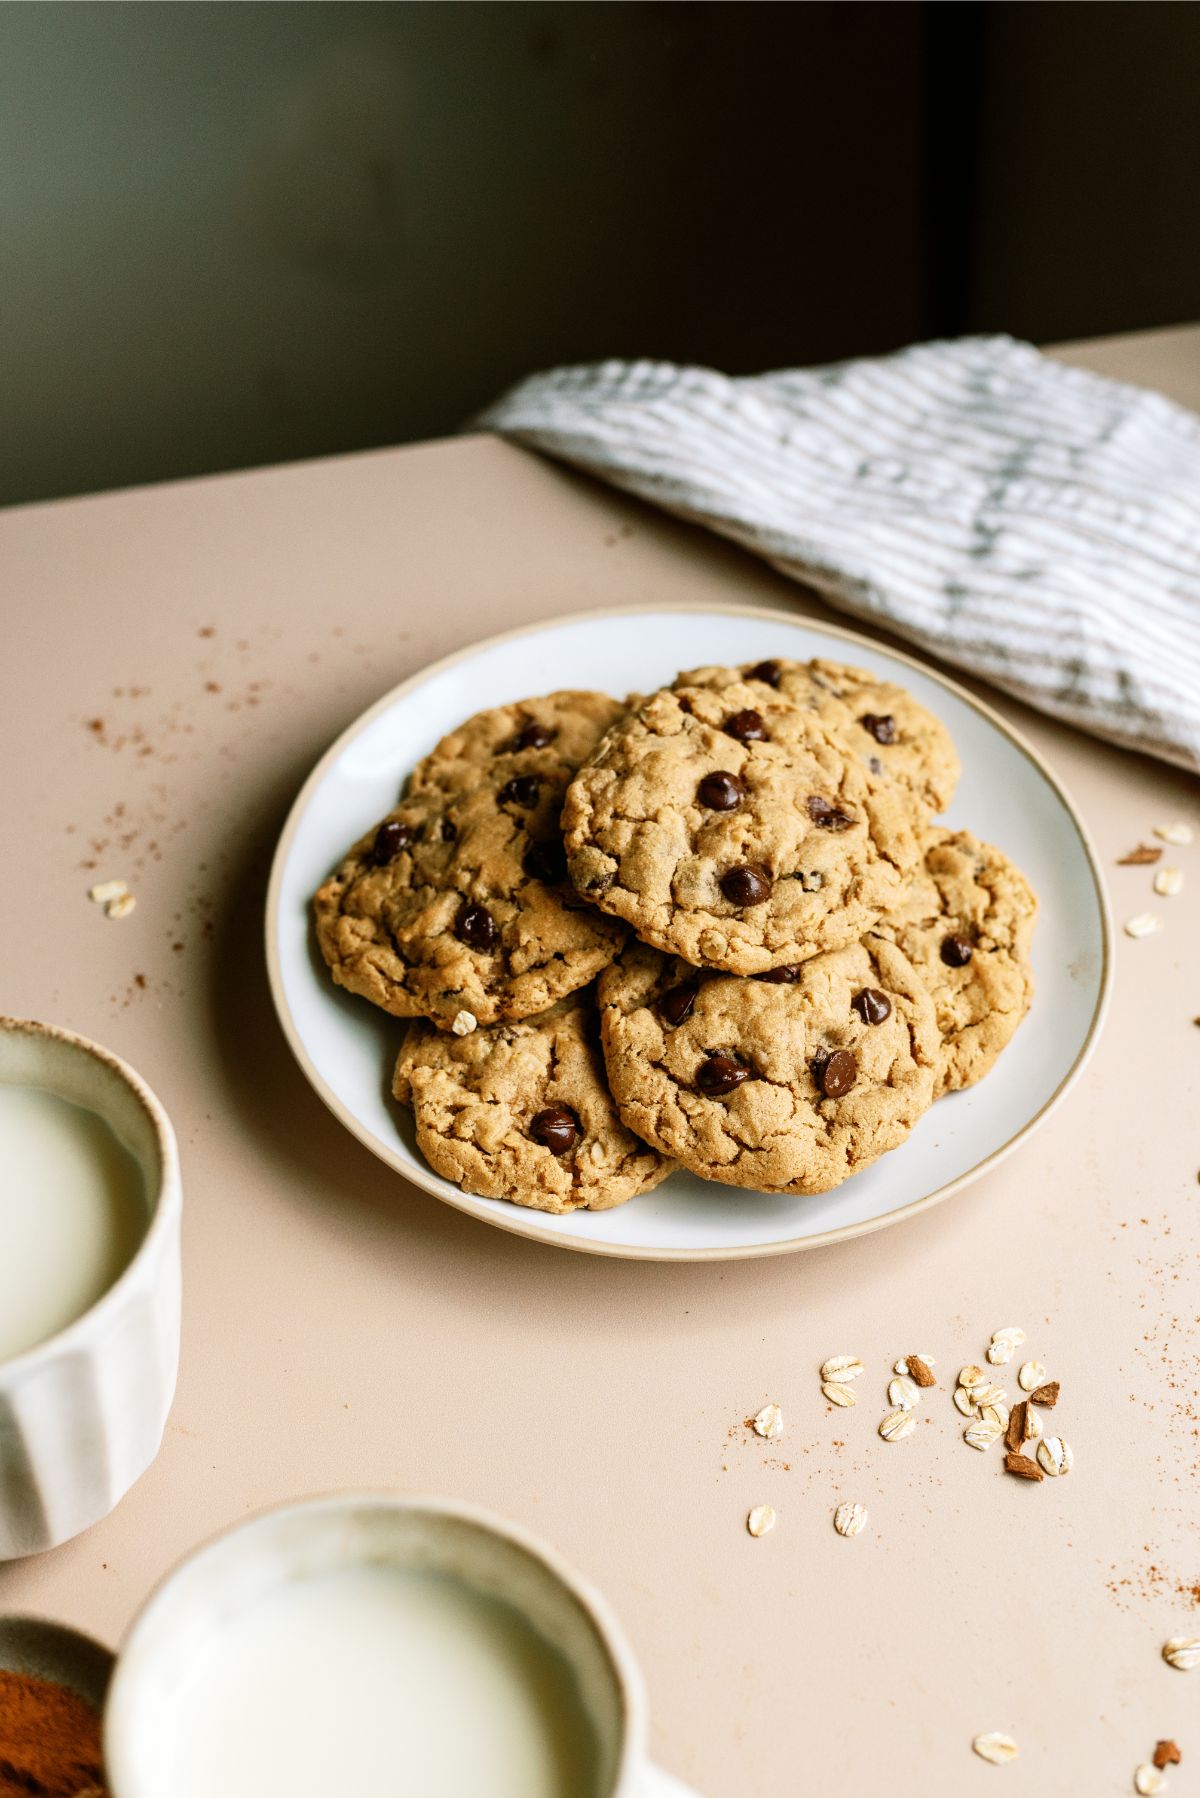 A plate of Oatmeal Chocolate Chip Peanut Butter Cookies